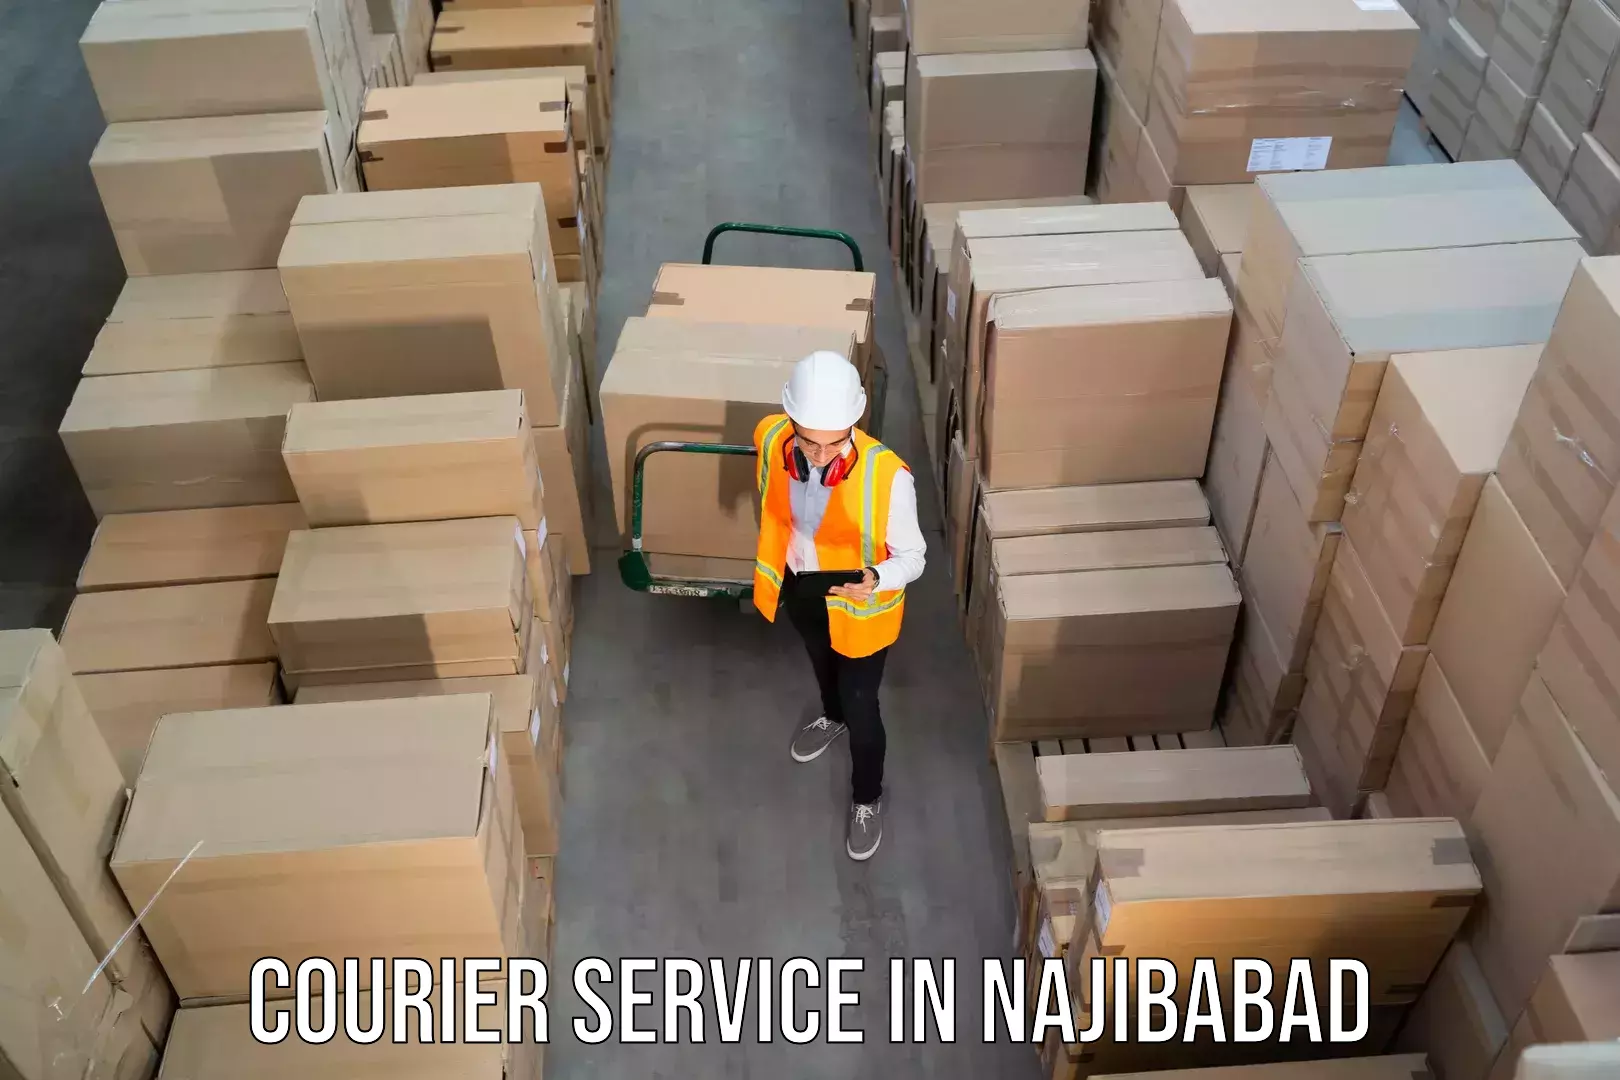 Efficient shipping operations in Najibabad